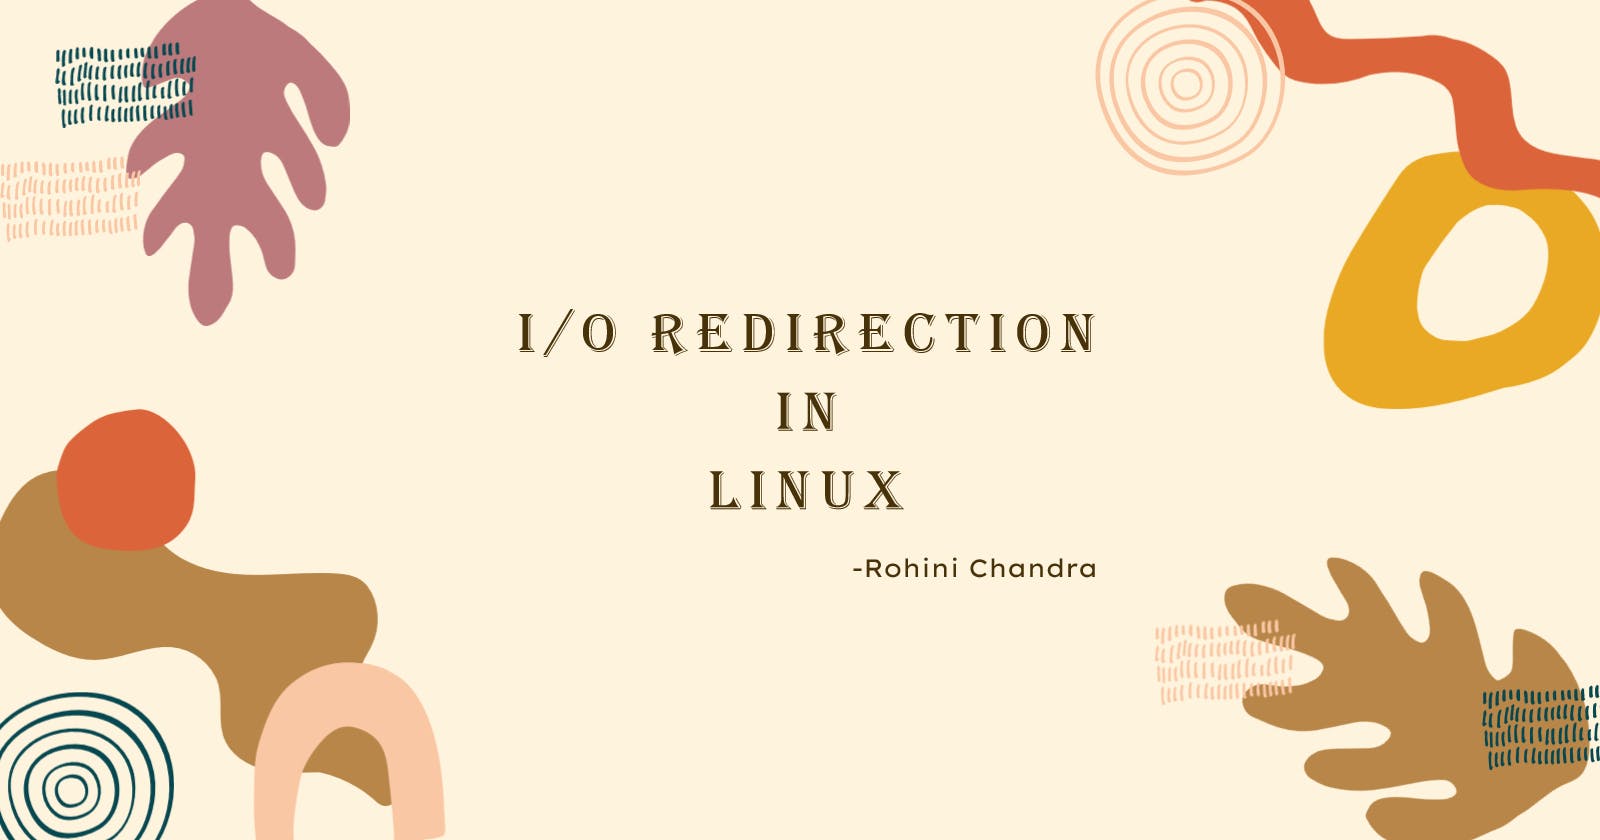 I/O Redirection in Linux